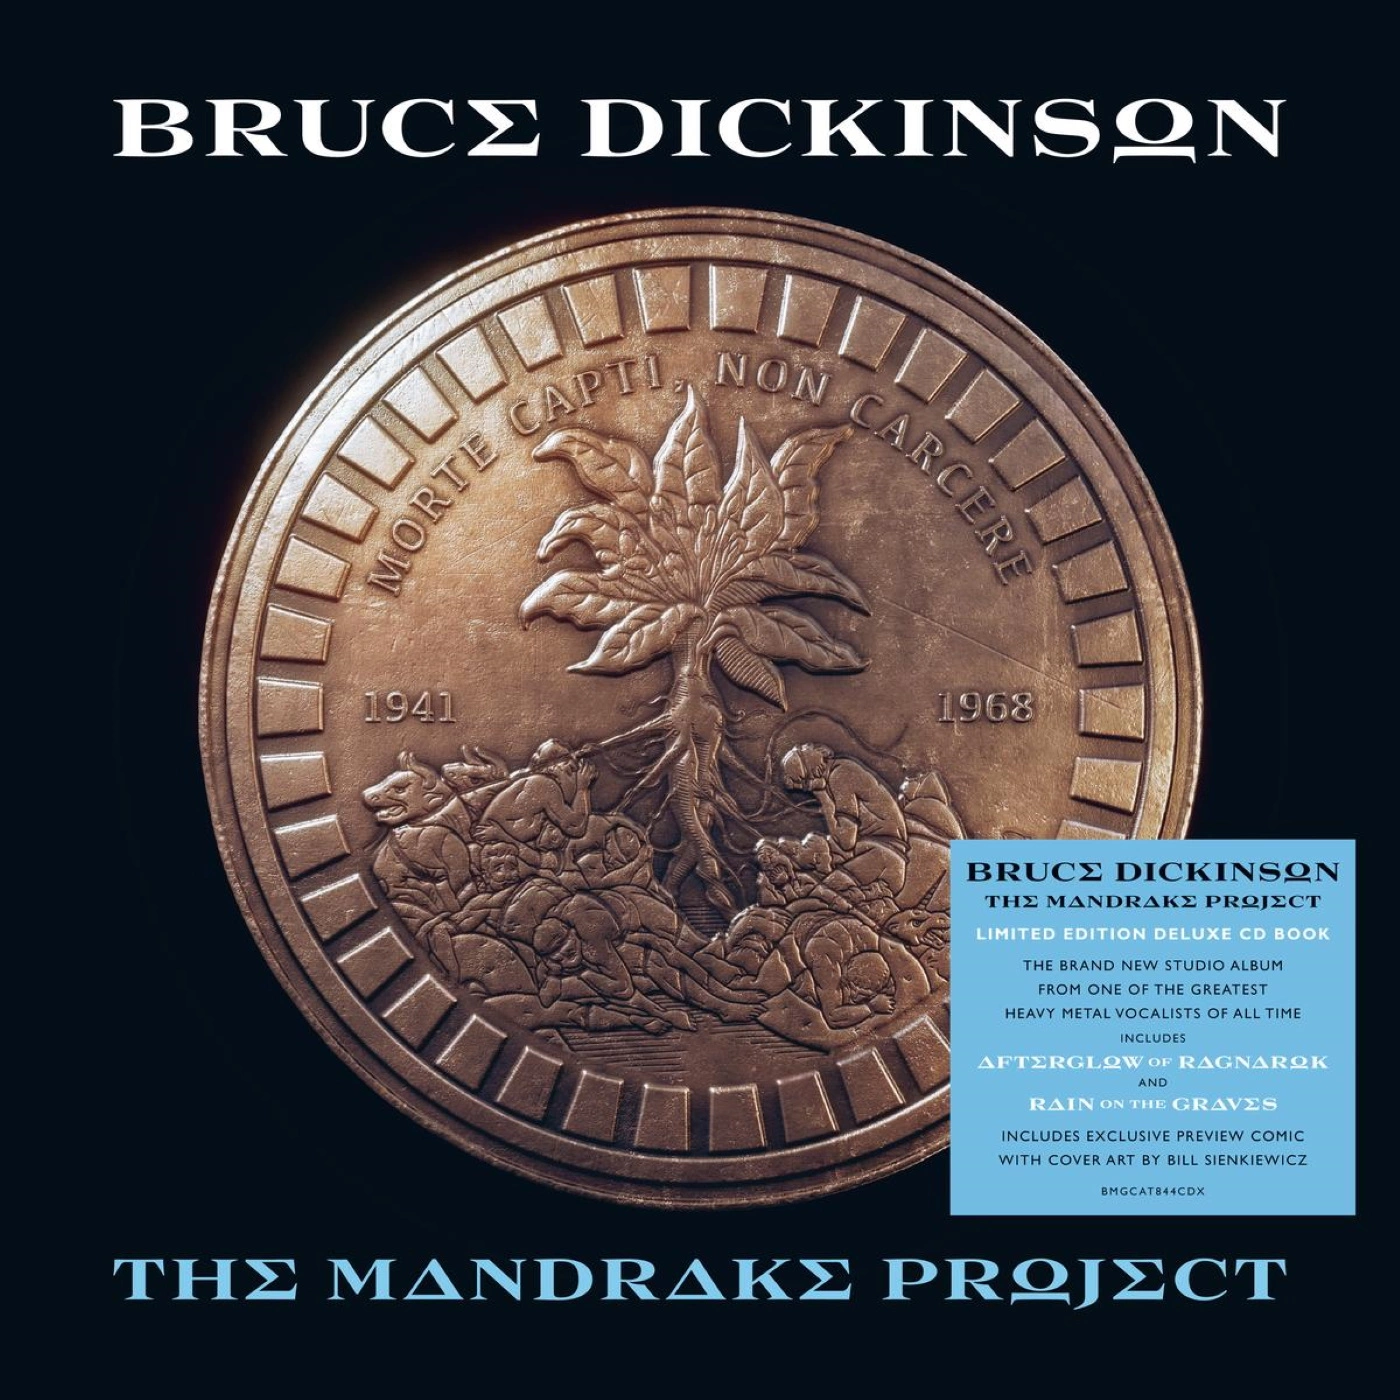 BRUCE DICKINSON - The Mandrake Project [SUPER DELUXE BOOKPACK EDITION]